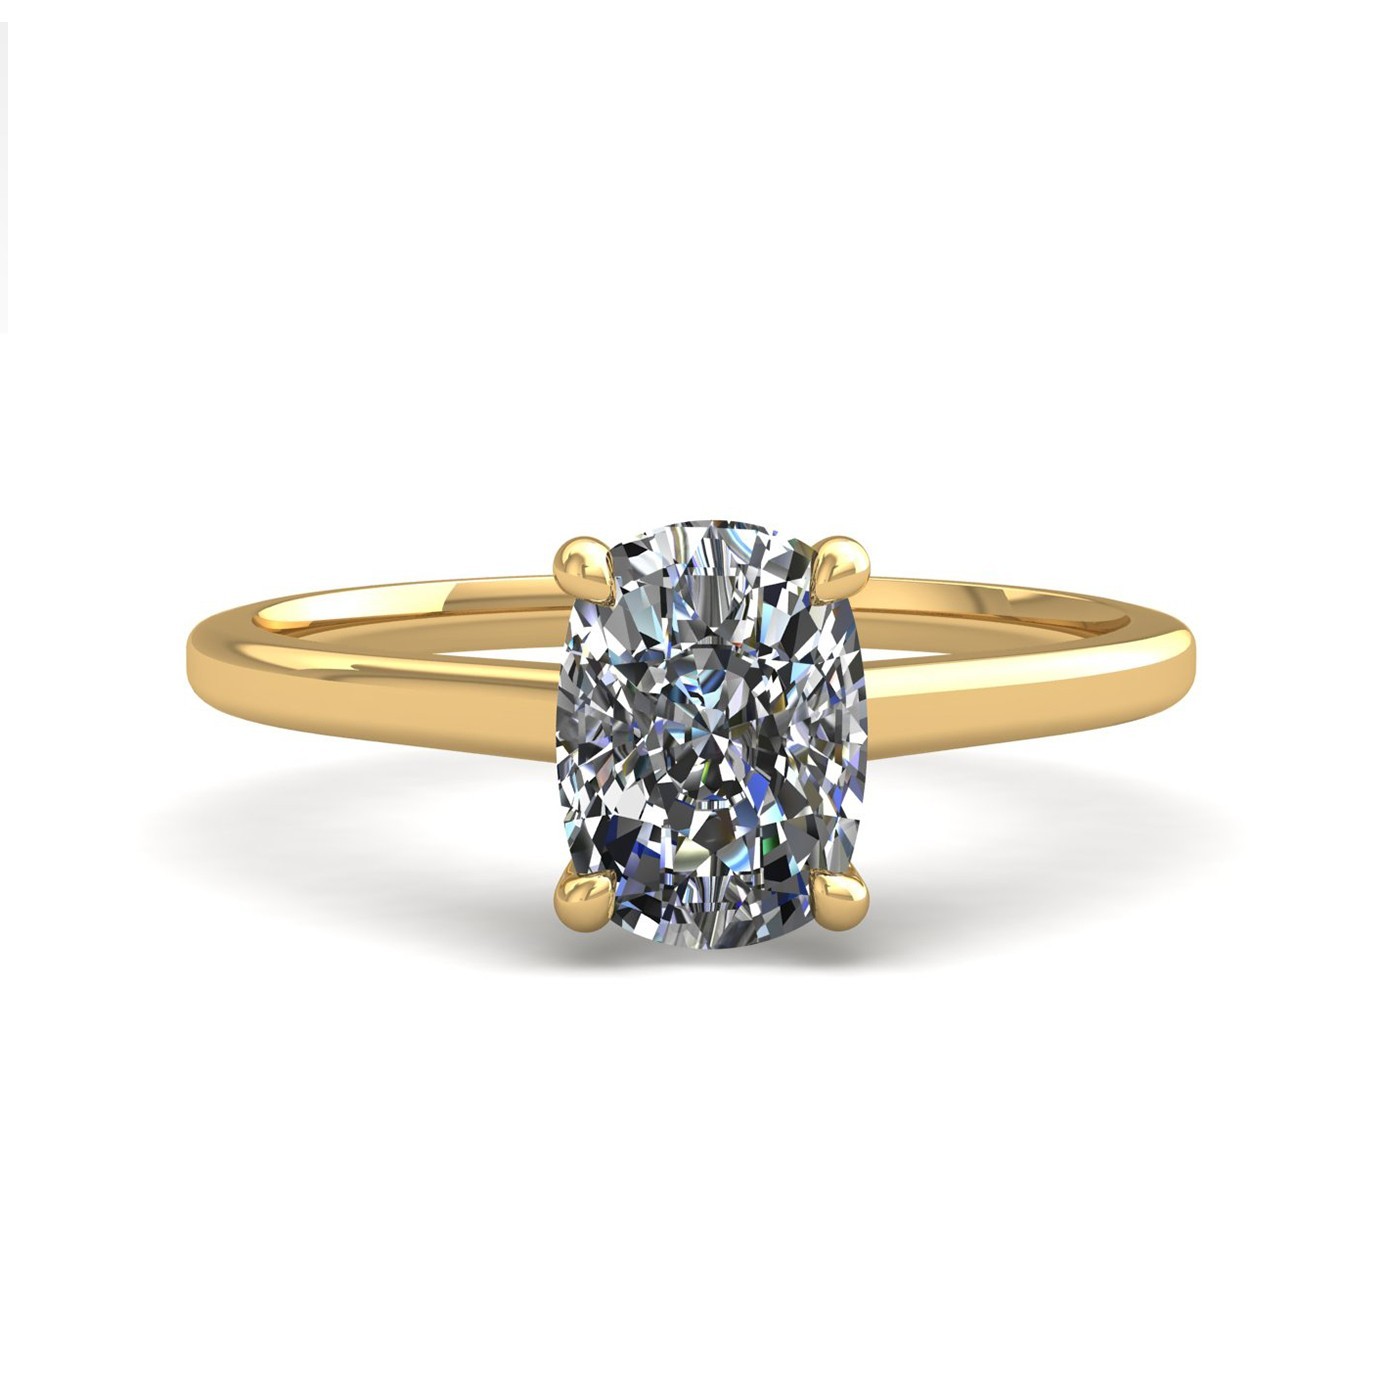 18k yellow gold  2.50 ct 4 prongs solitaire elongated cushion cut diamond engagement ring with whisper thin band Photos & images